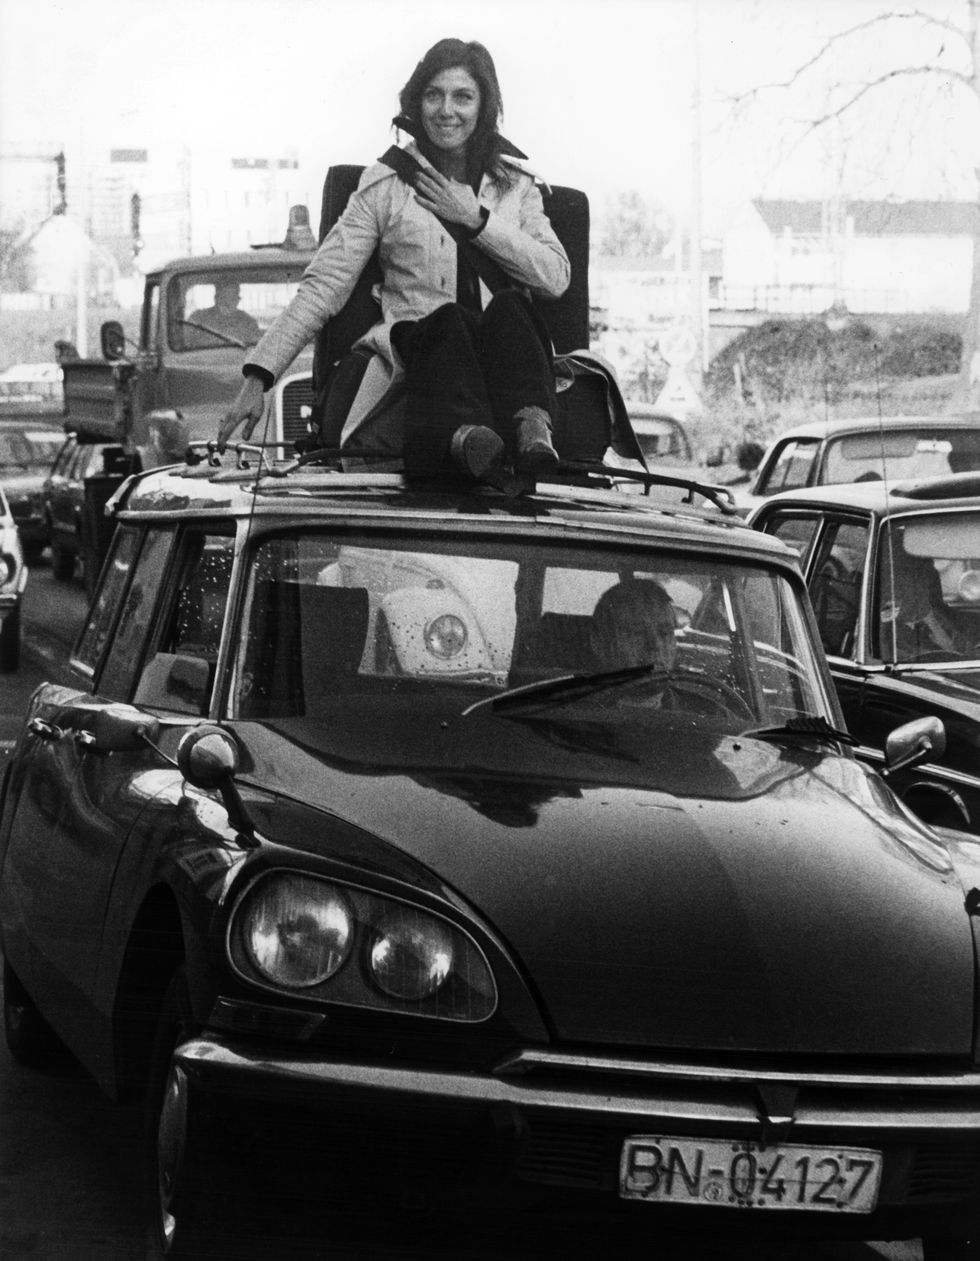 On December 7, 1976, A Woman Drives In A Seat On The Roof Of A Car In Bonn, Wearing A Seatbelt.  With This Unusual Campaign, The Road Safety Council And The Federal Ministry Of Transport Wanted To Counteract The Declining Rate Of Seat Belt Use. Worldwide Use Of Cars, Photo By Peter Poppicture Alliance Via Getty Images